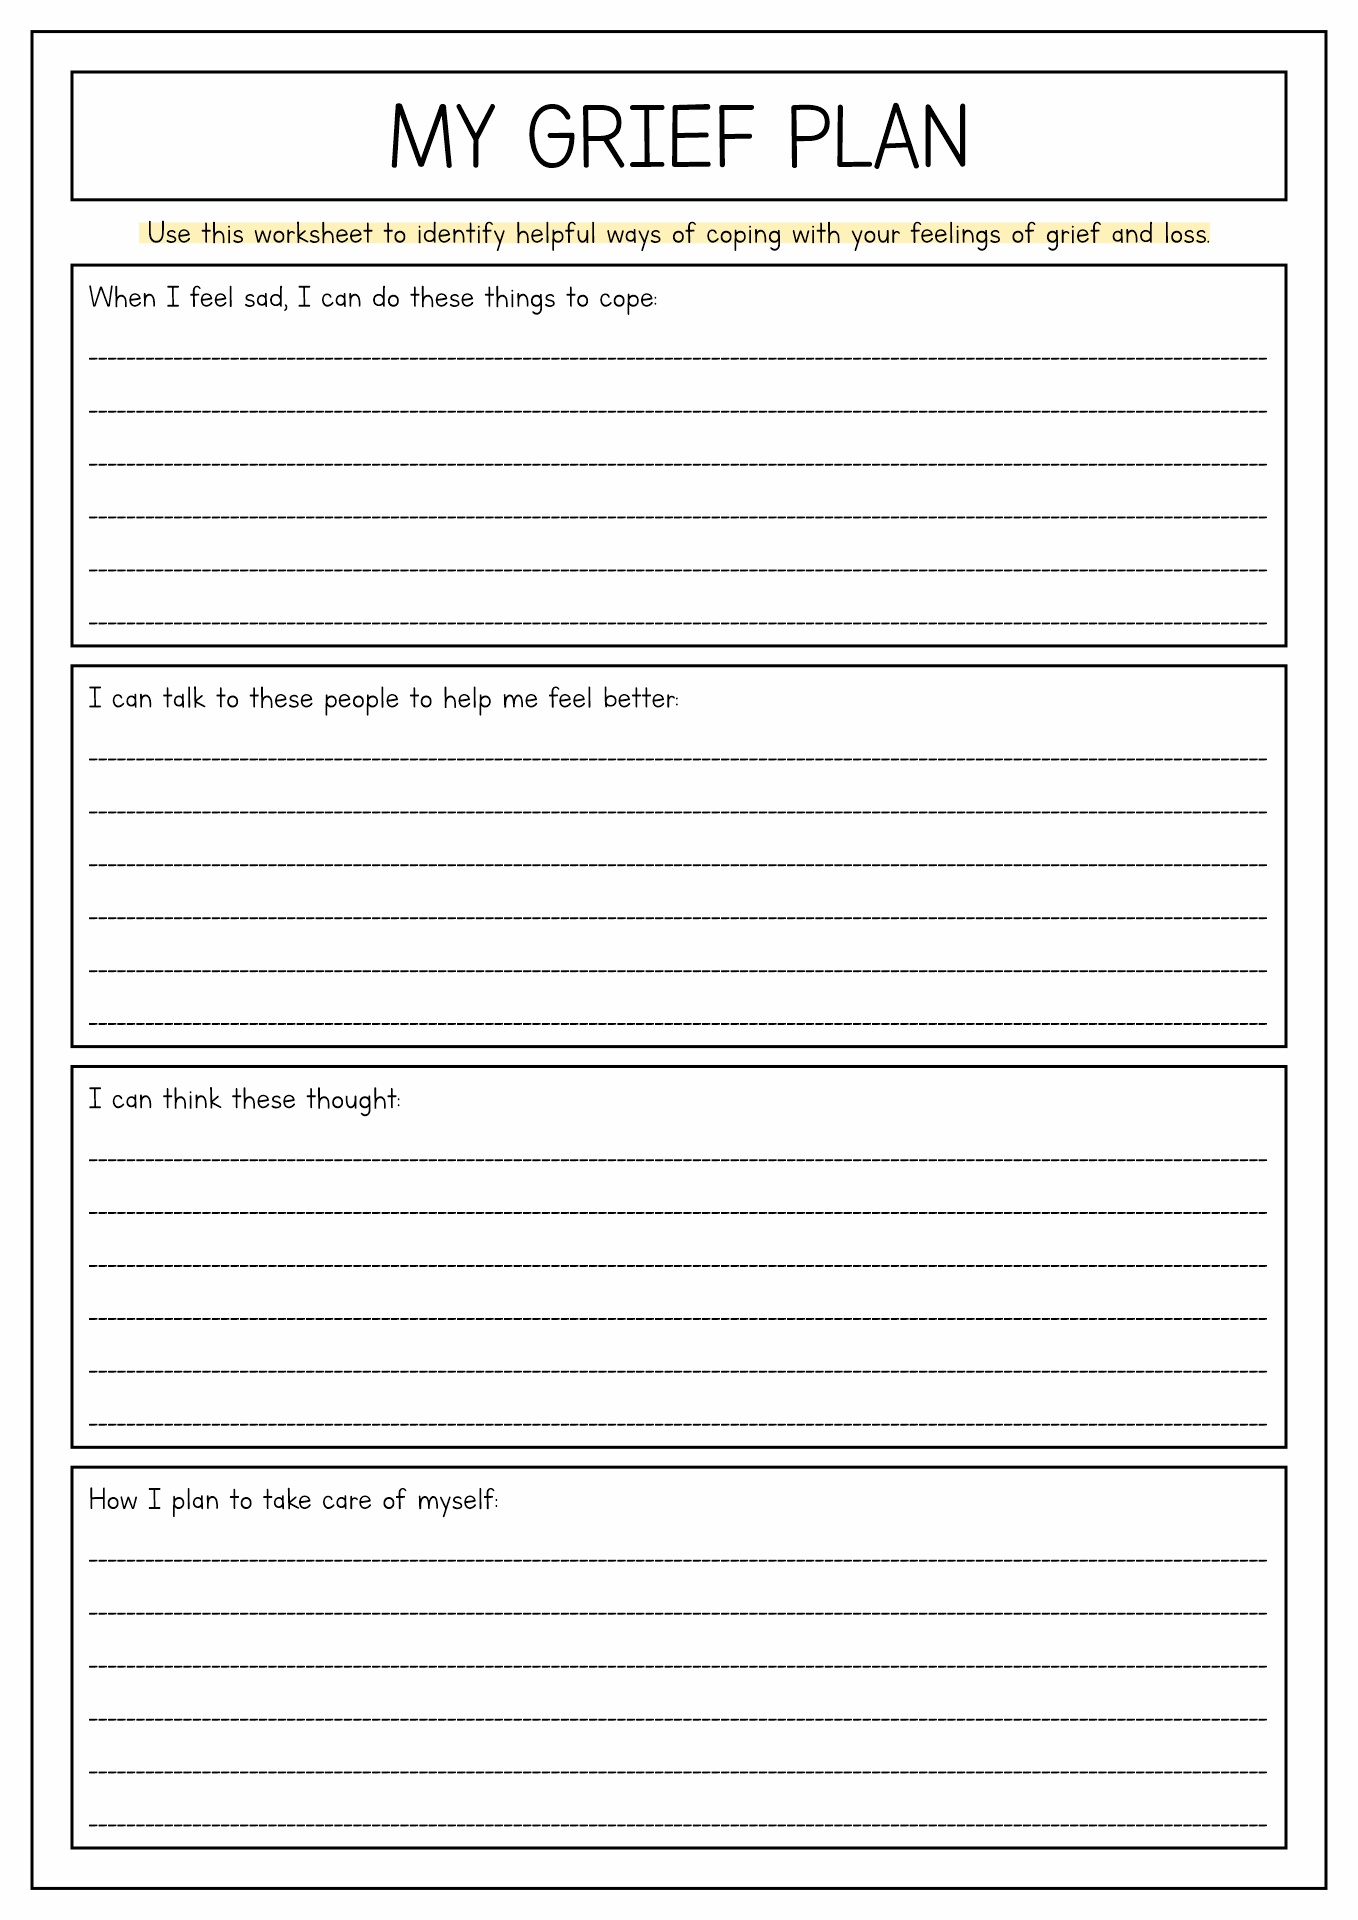 Free Printable Worksheets For Teens And Grief